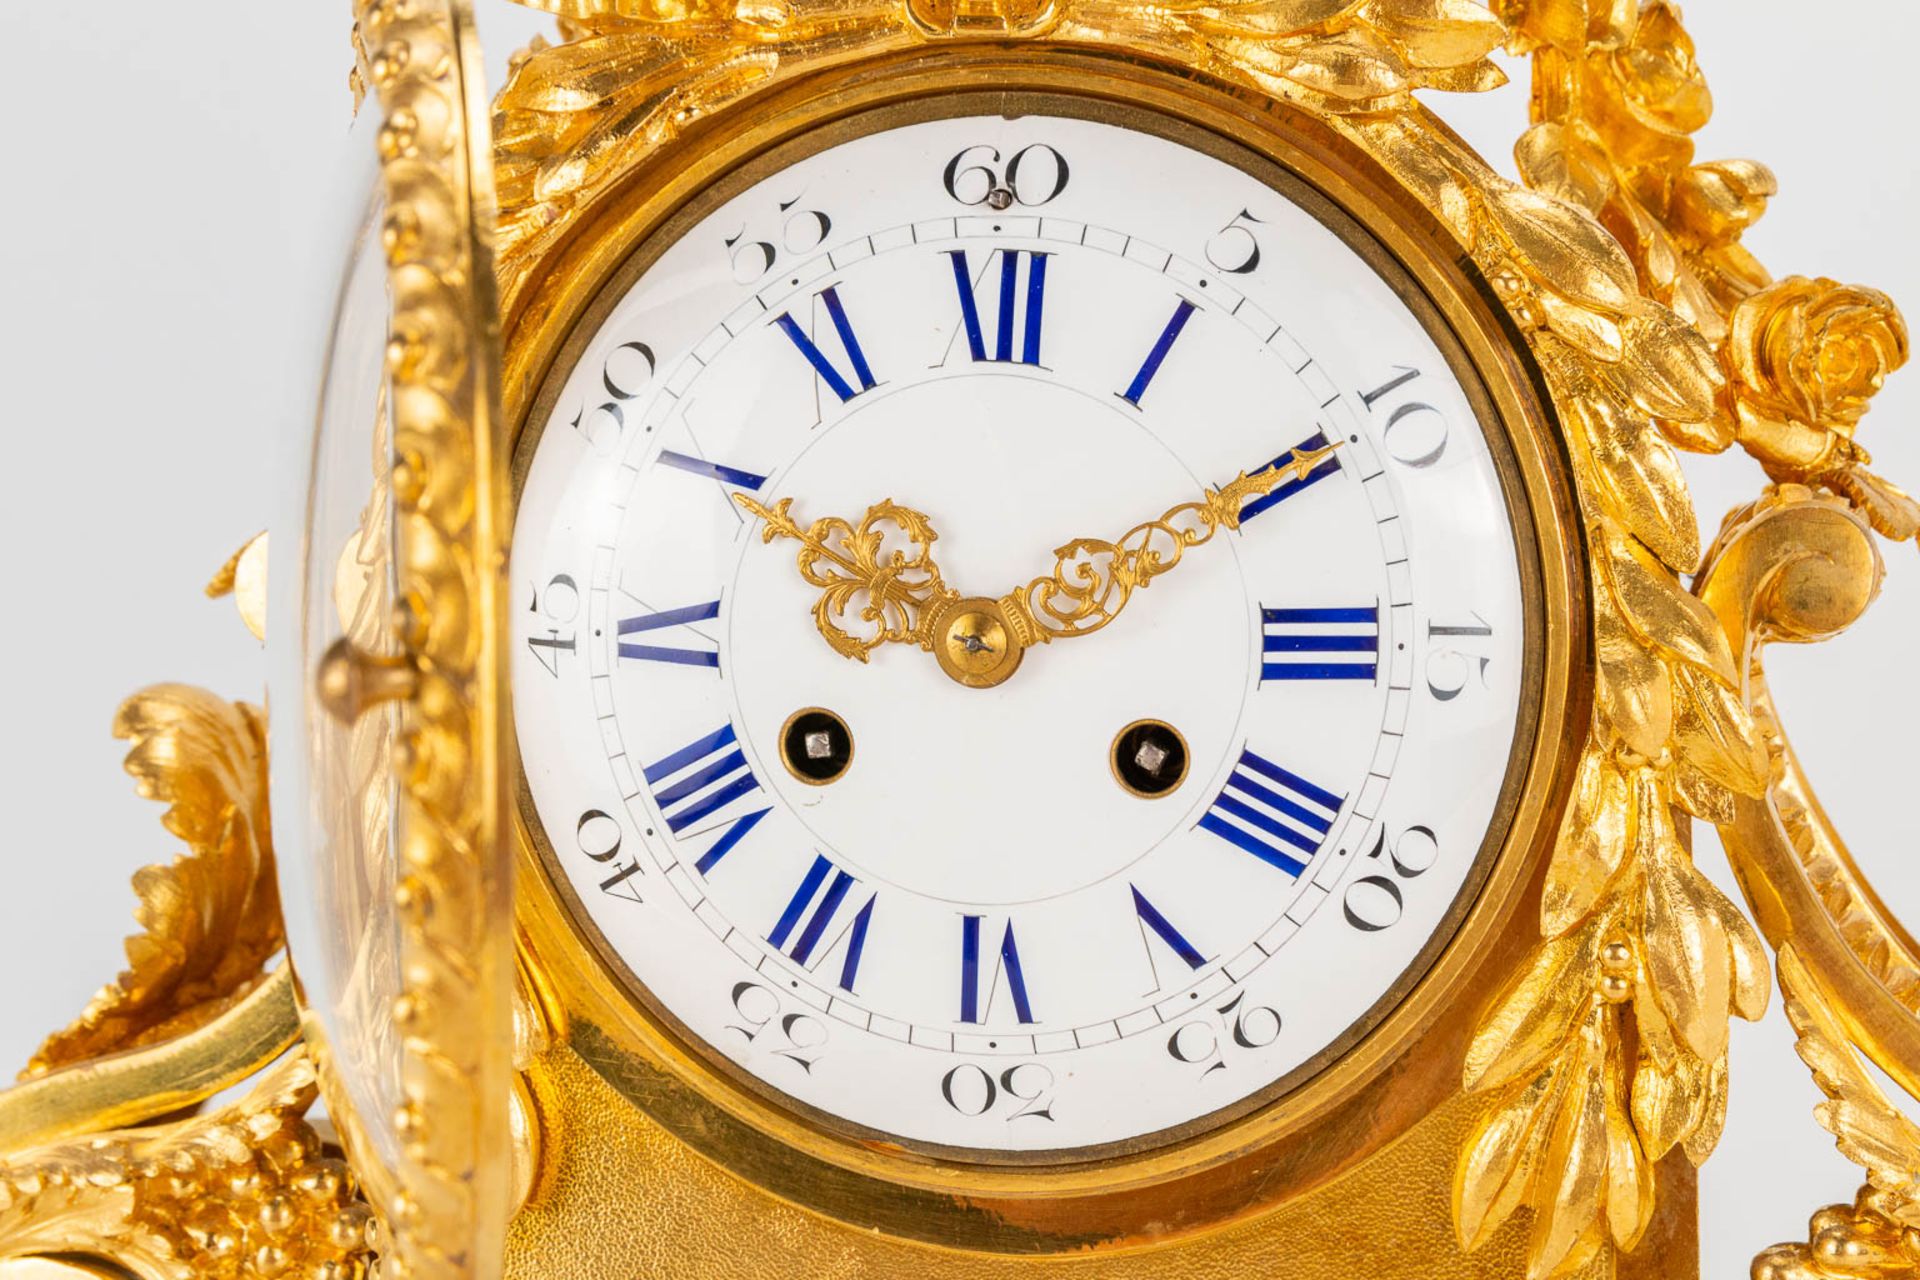 A bronze ormolu table clock made in Louis XVI style. 19th century. (15 x 41 x 42 cm) - Image 15 of 20